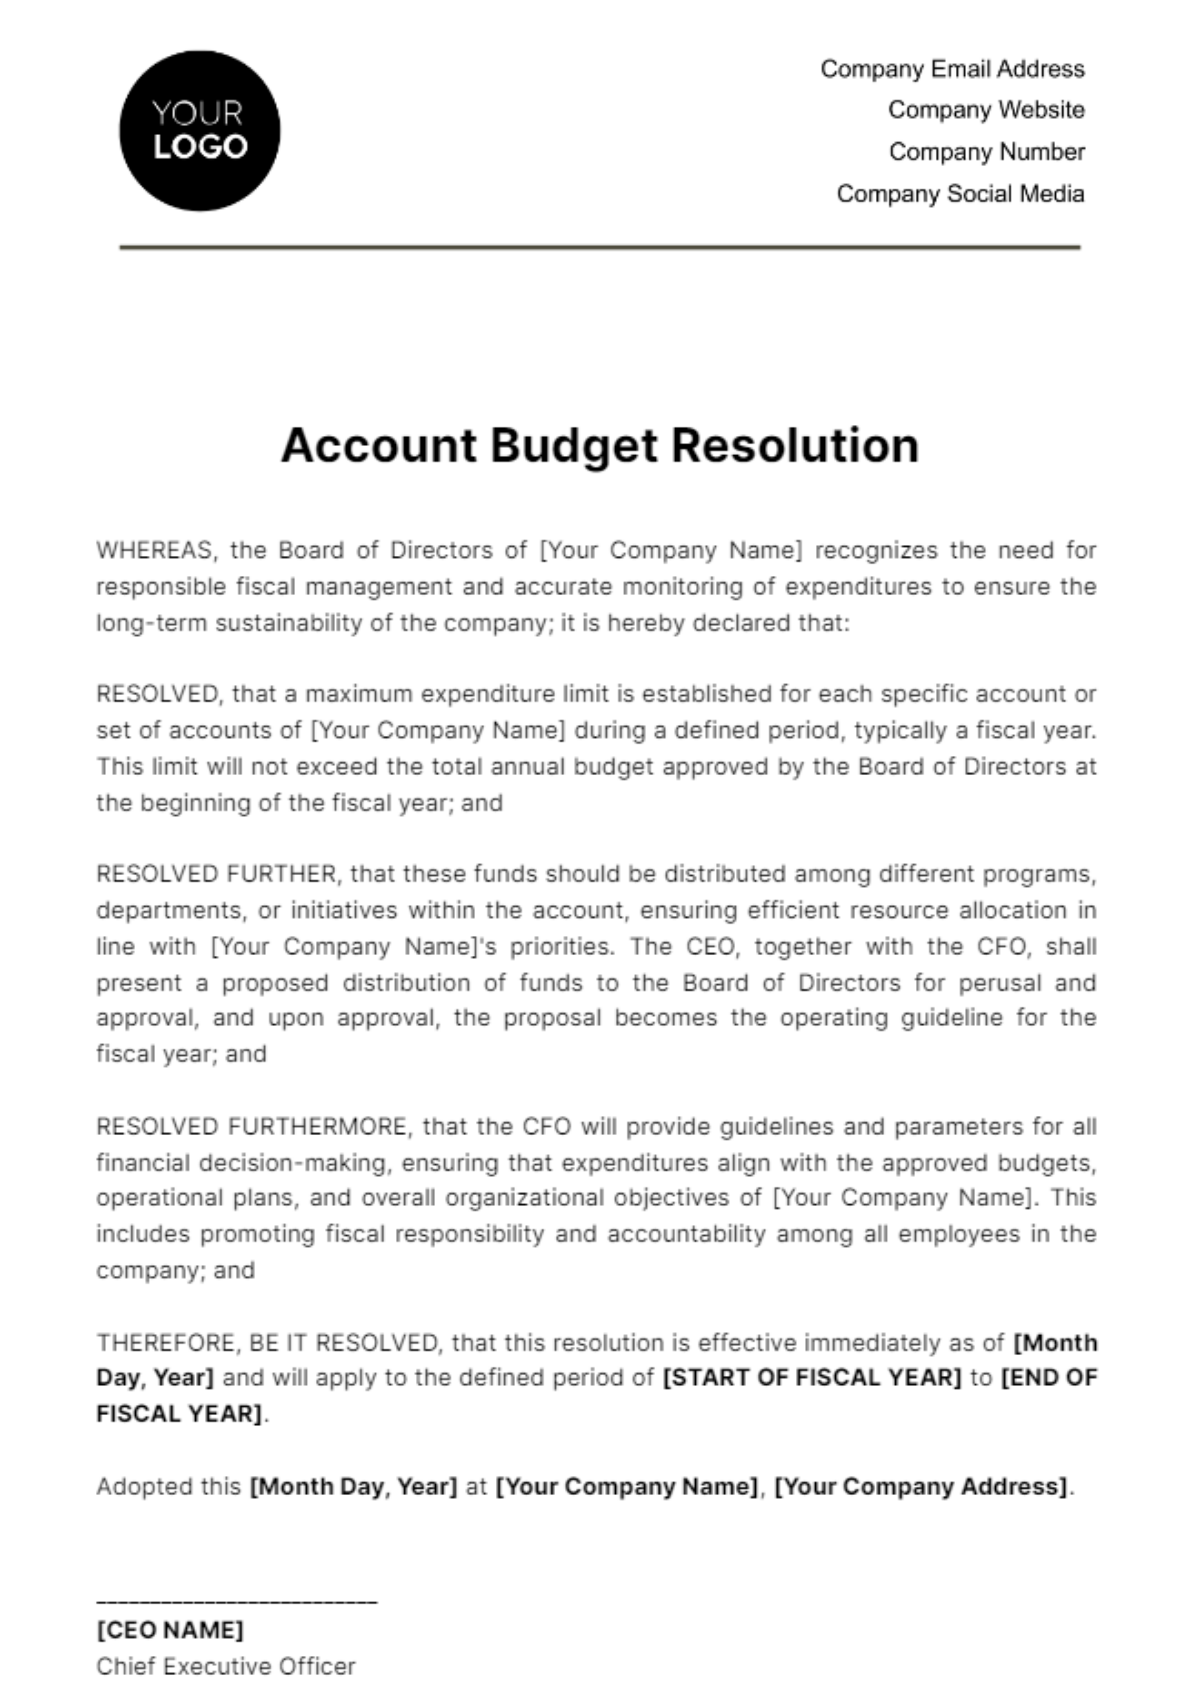 Account Budget Resolution Template